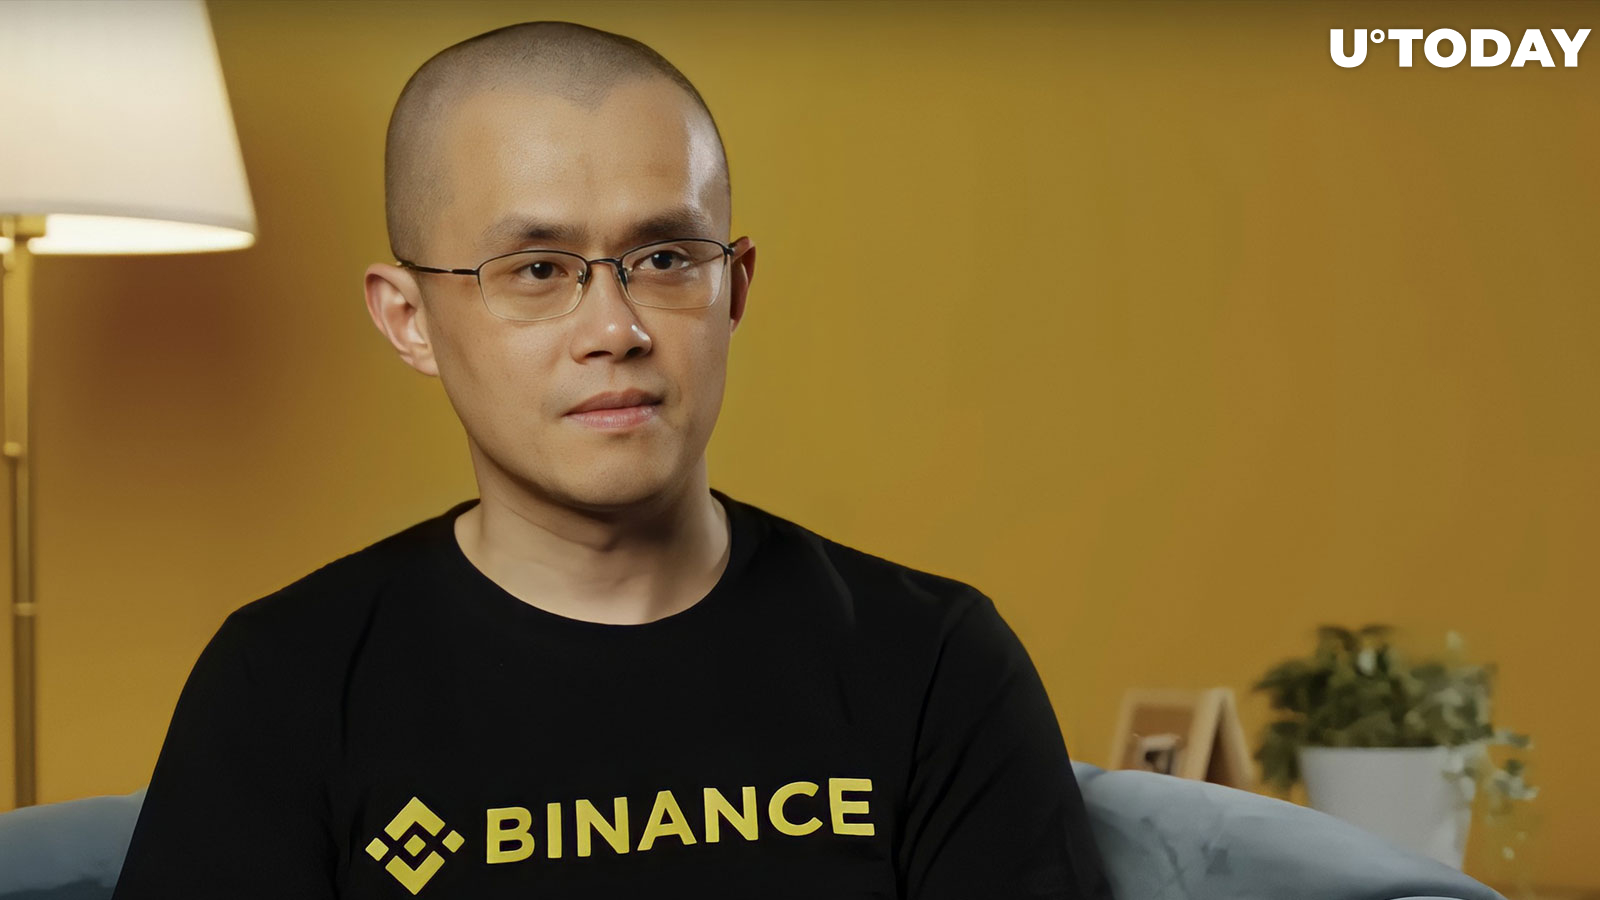 Binance CEO Might Face Criminal Charges in U.S.